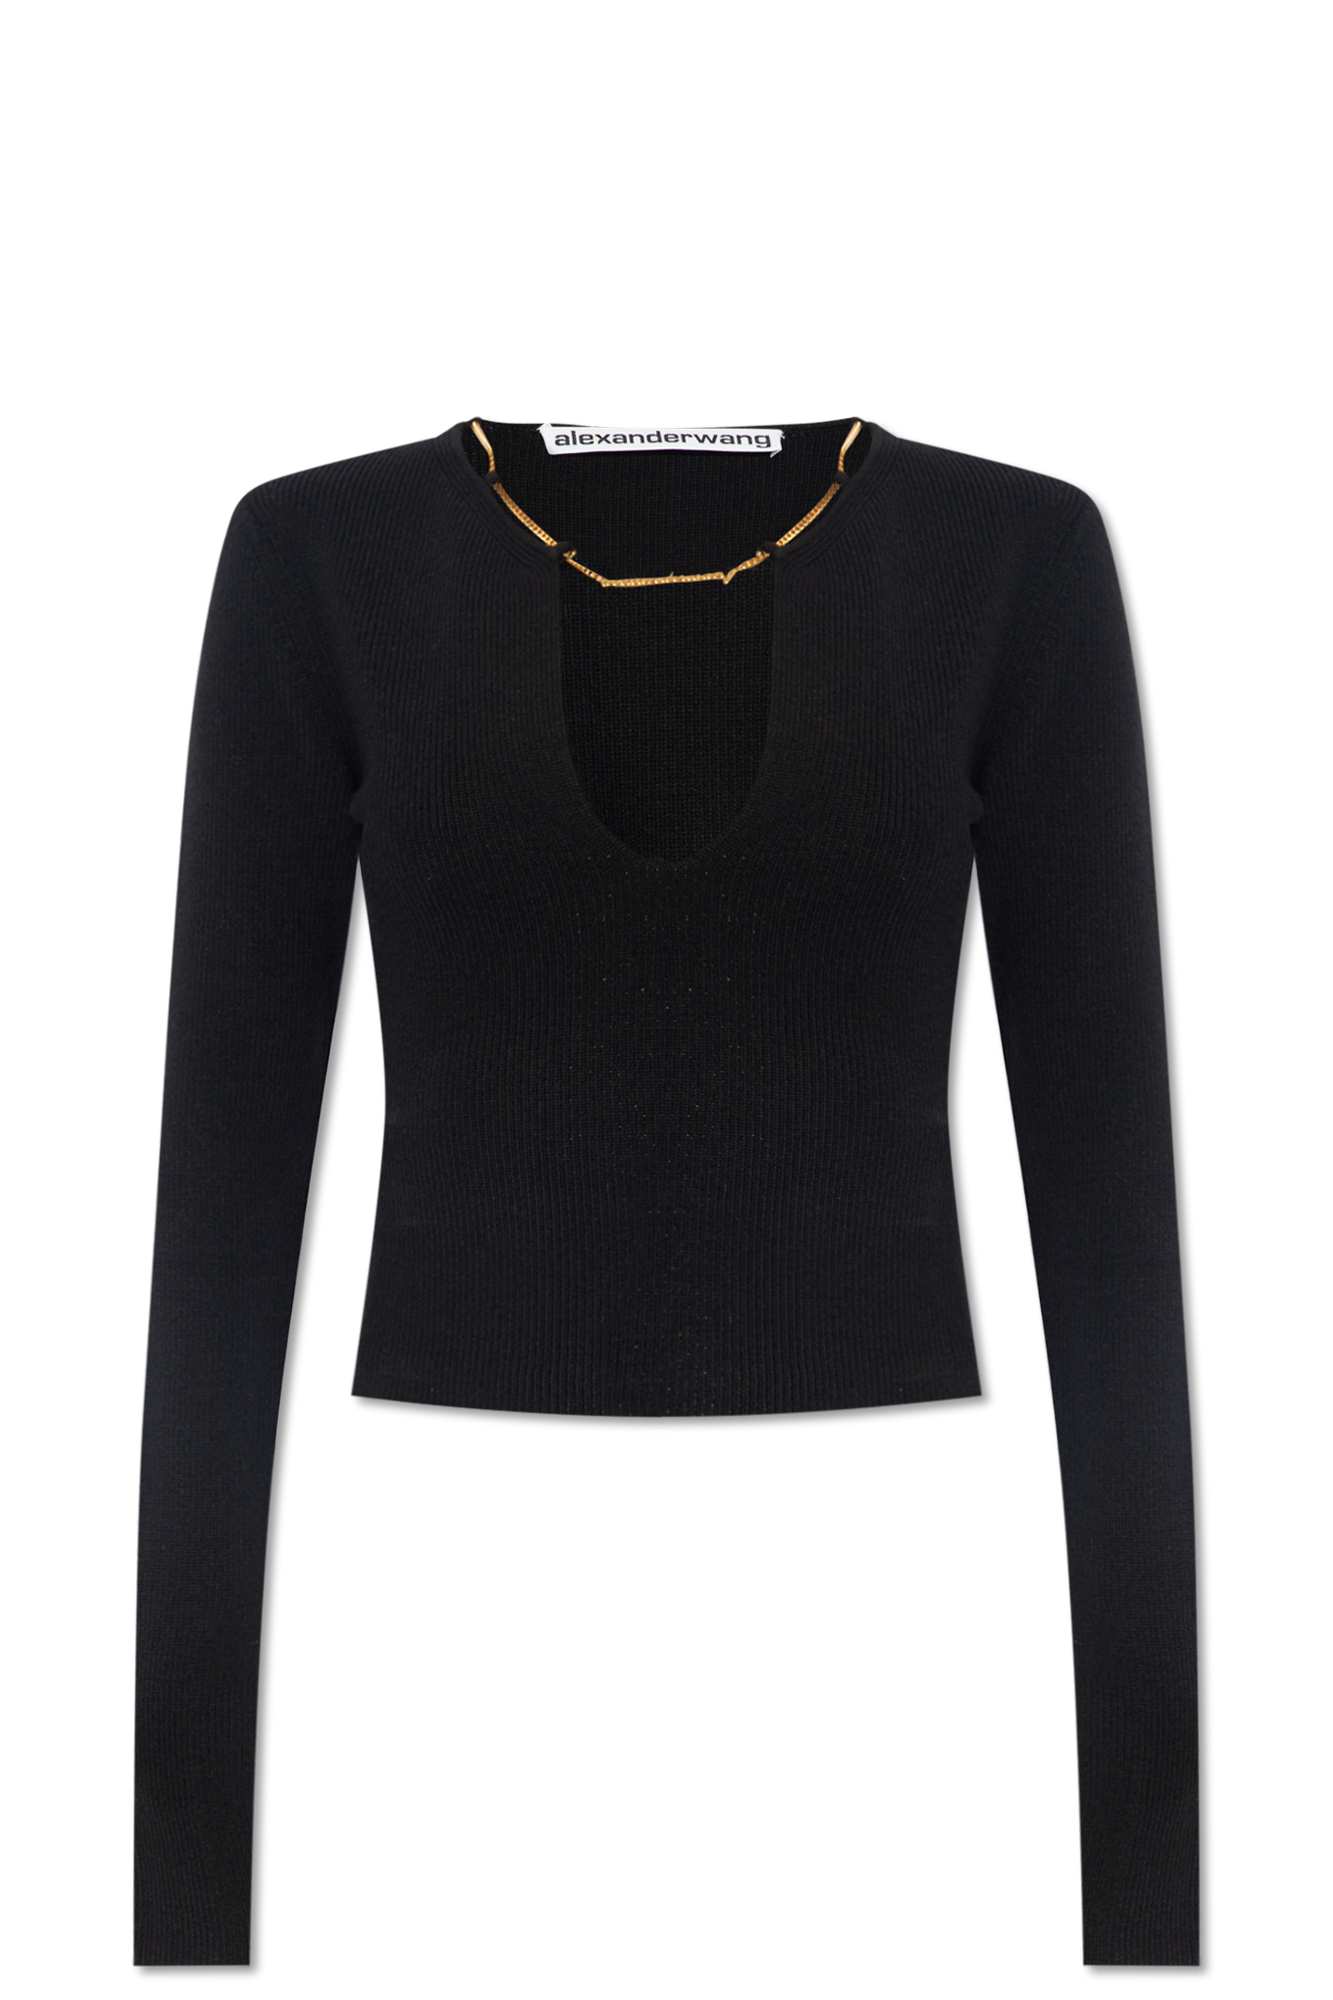 Alexander Wang Sweater with decorative chain